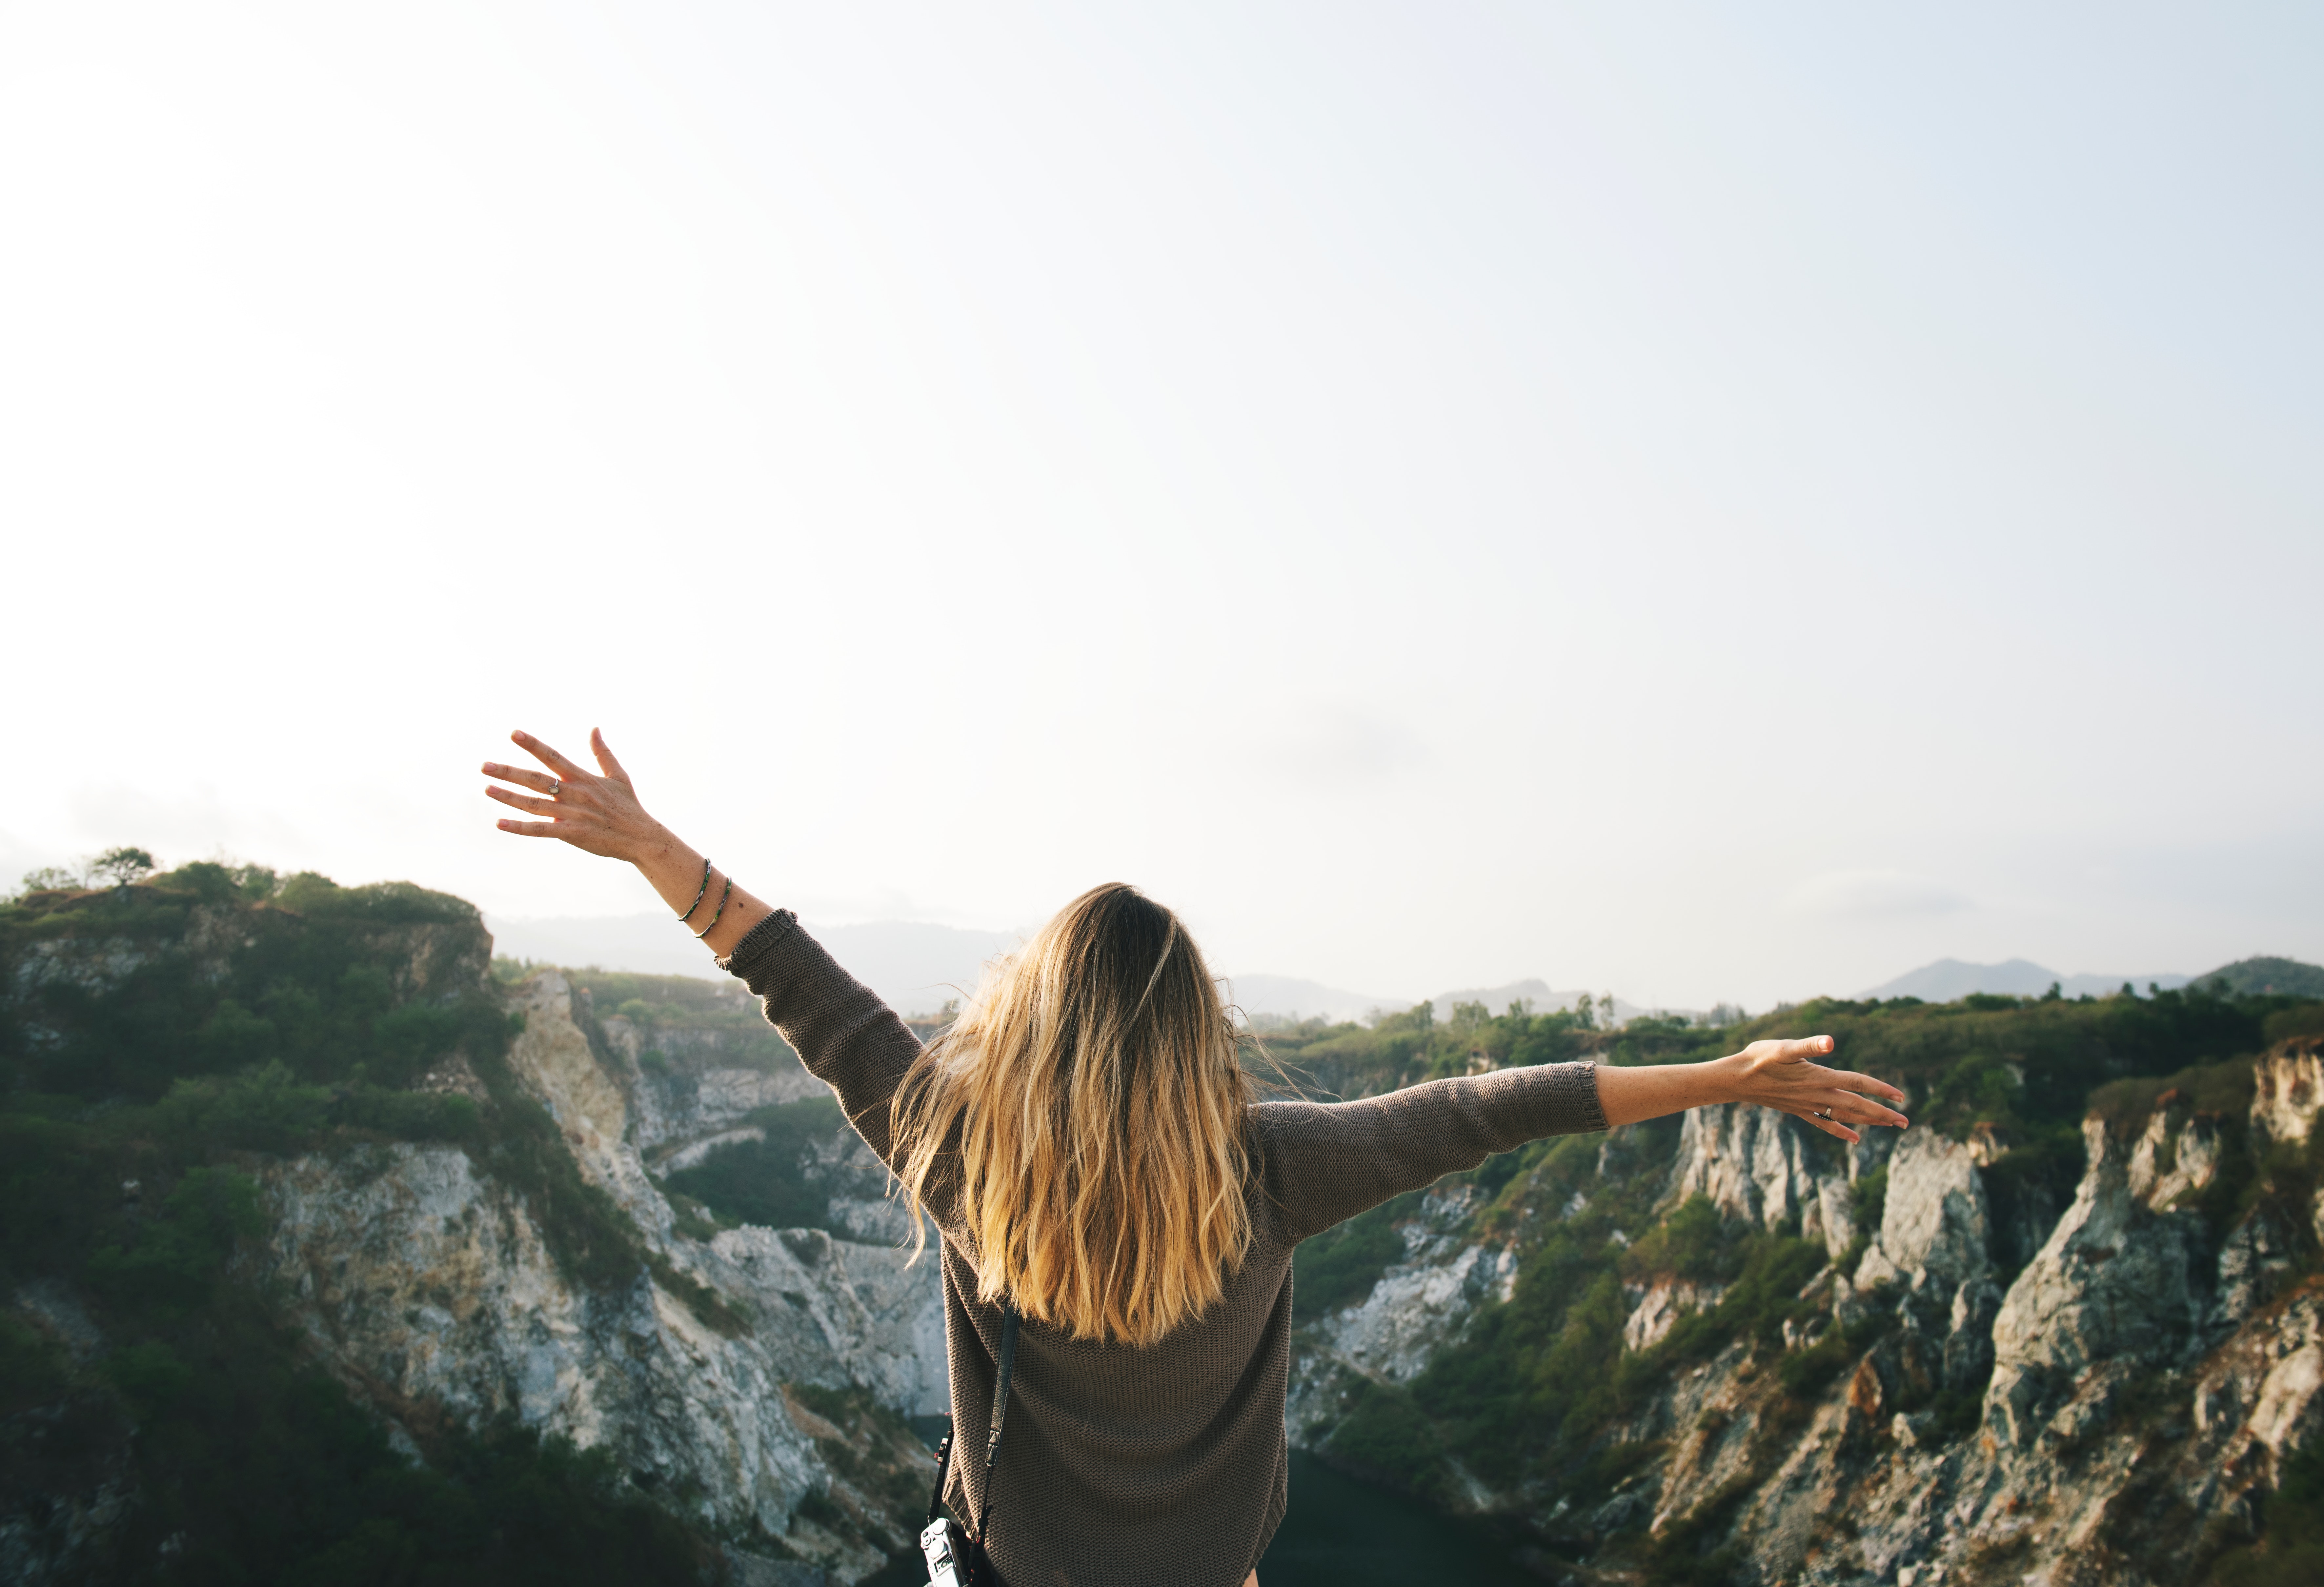 Woman With Blonde Hair at the Top of the Mountain Raising Her Hands, Adventure, Blonde hair, Cliffside, Daylight, HQ Photo